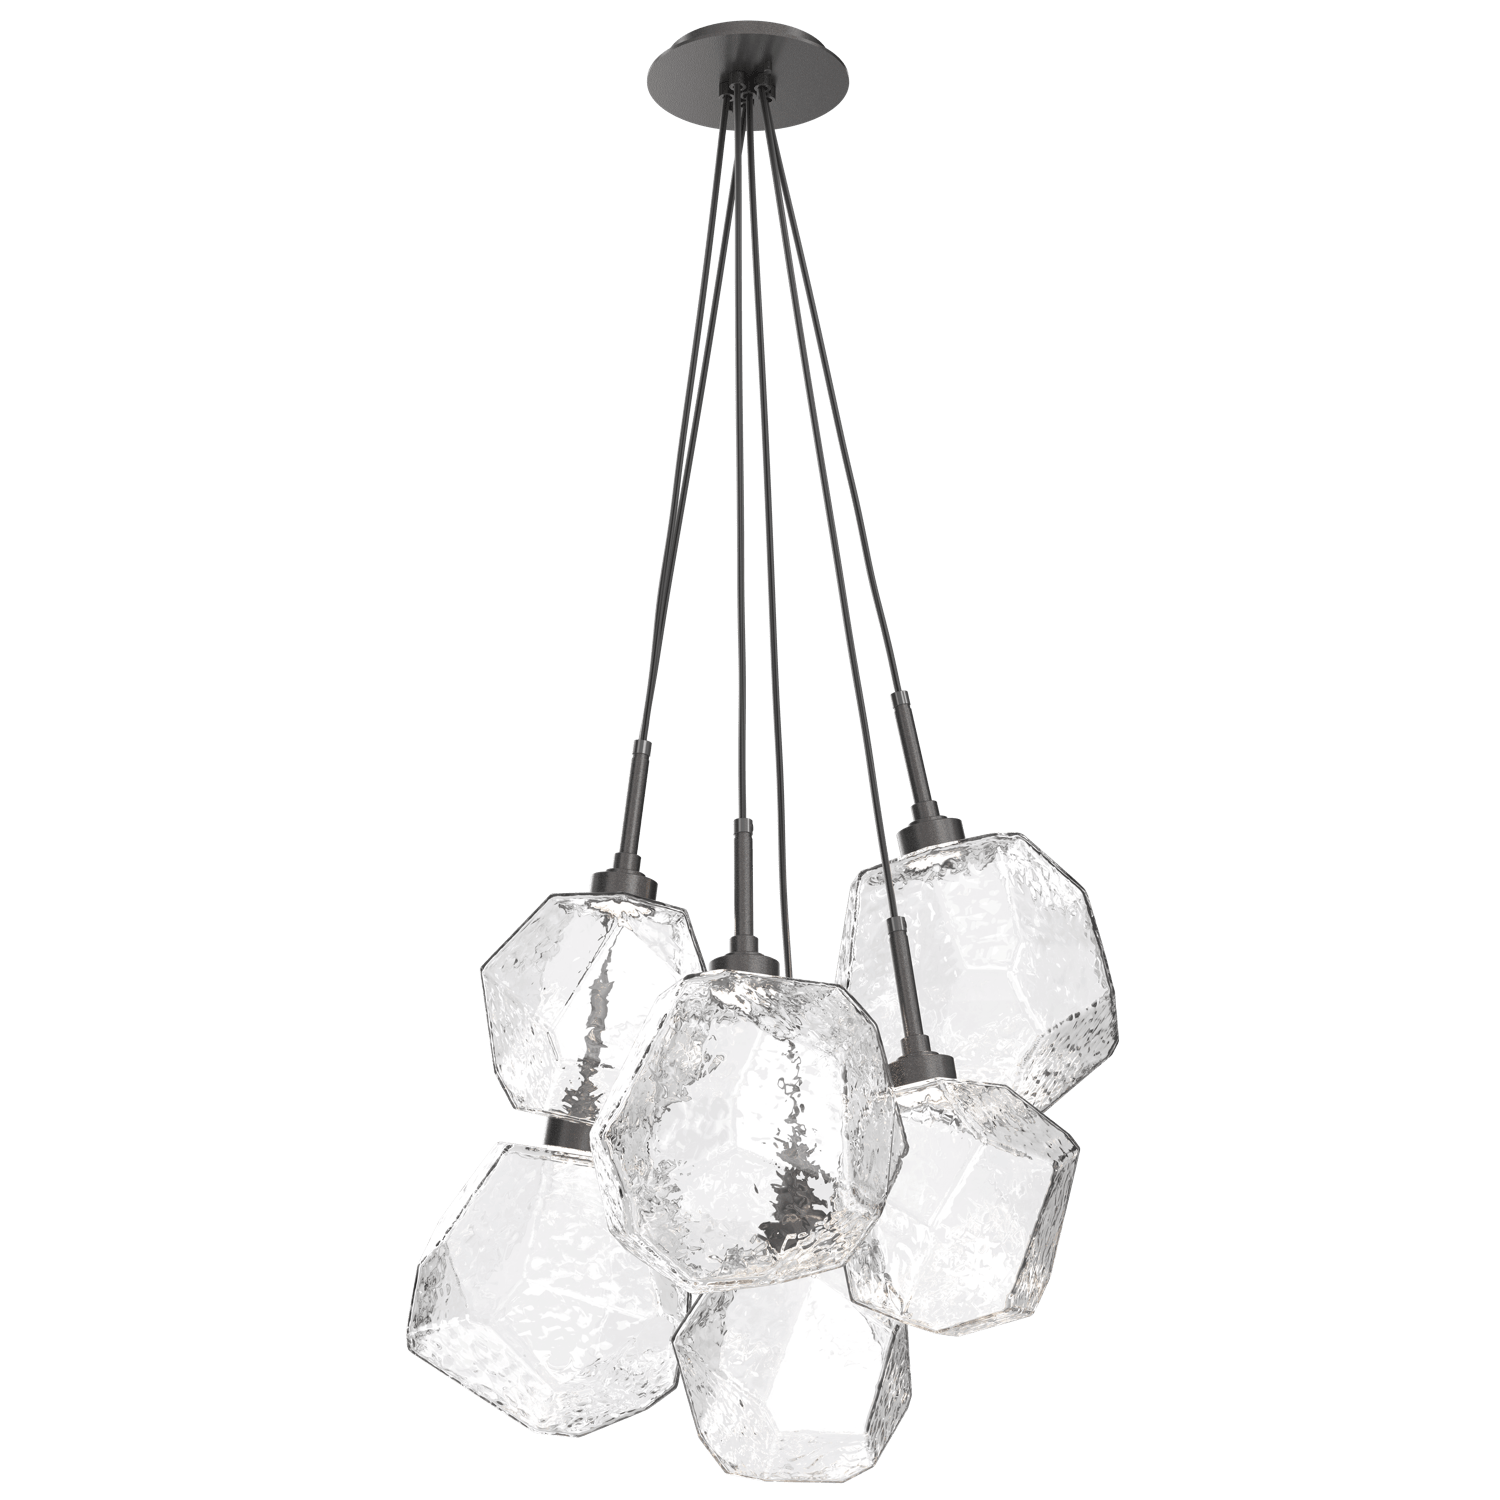 CHB0039-0F-GP-C-Hammerton-Studio-Gem-6-light-cluster-pendant-light-with-graphite-finish-and-clear-blown-glass-shades-and-LED-lamping